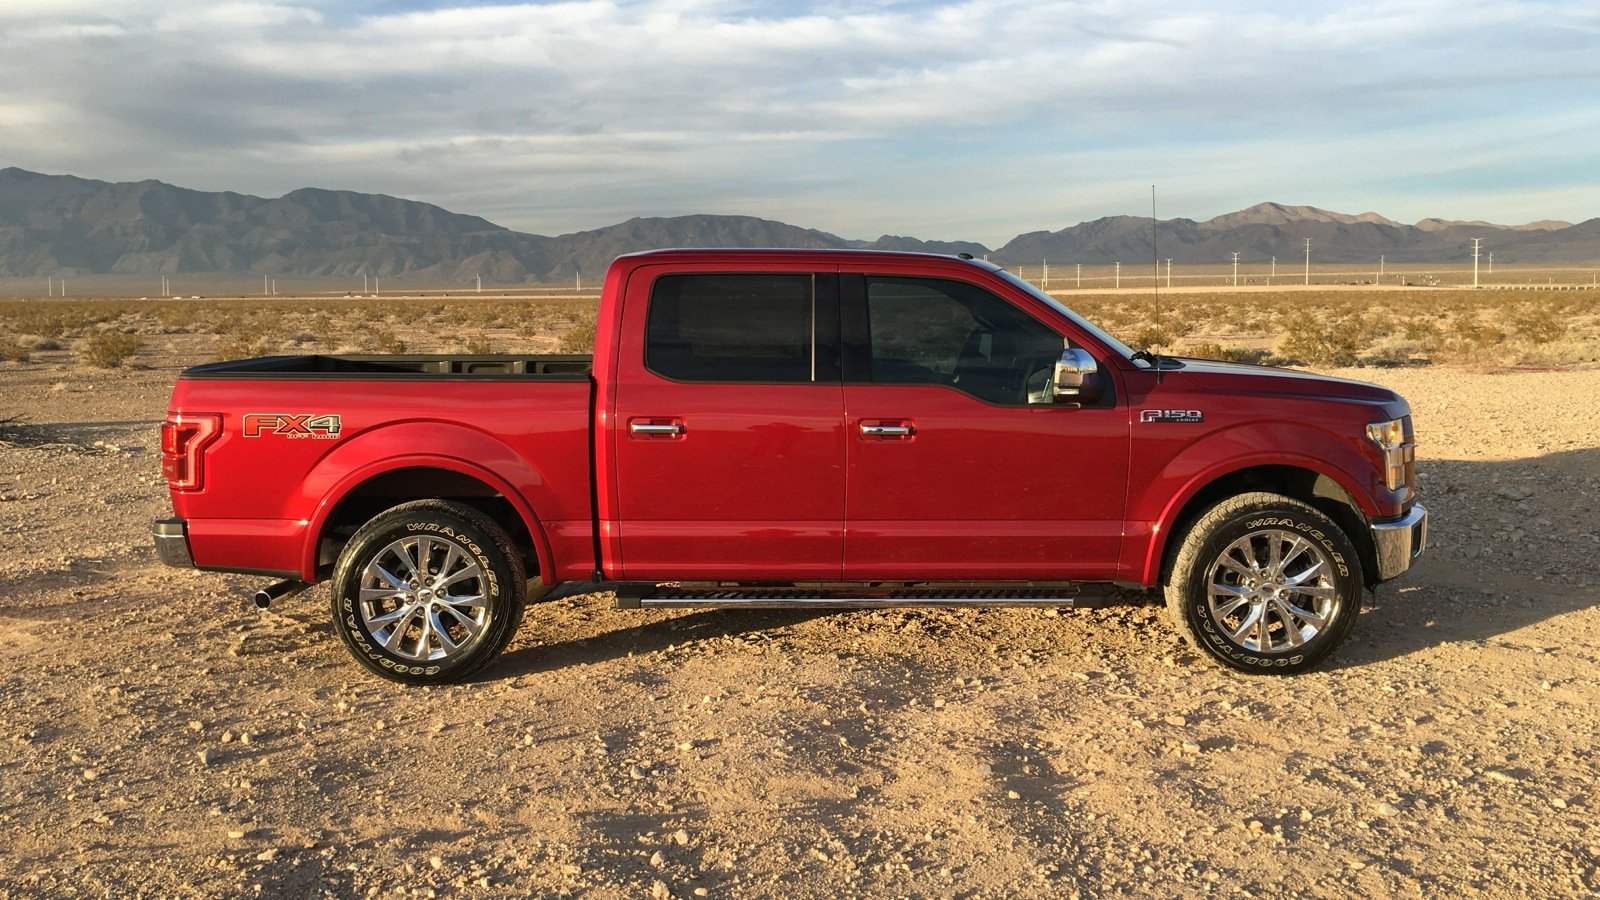 Ford F 150 Reviews Ford F 150 Price Photos And Specs ...